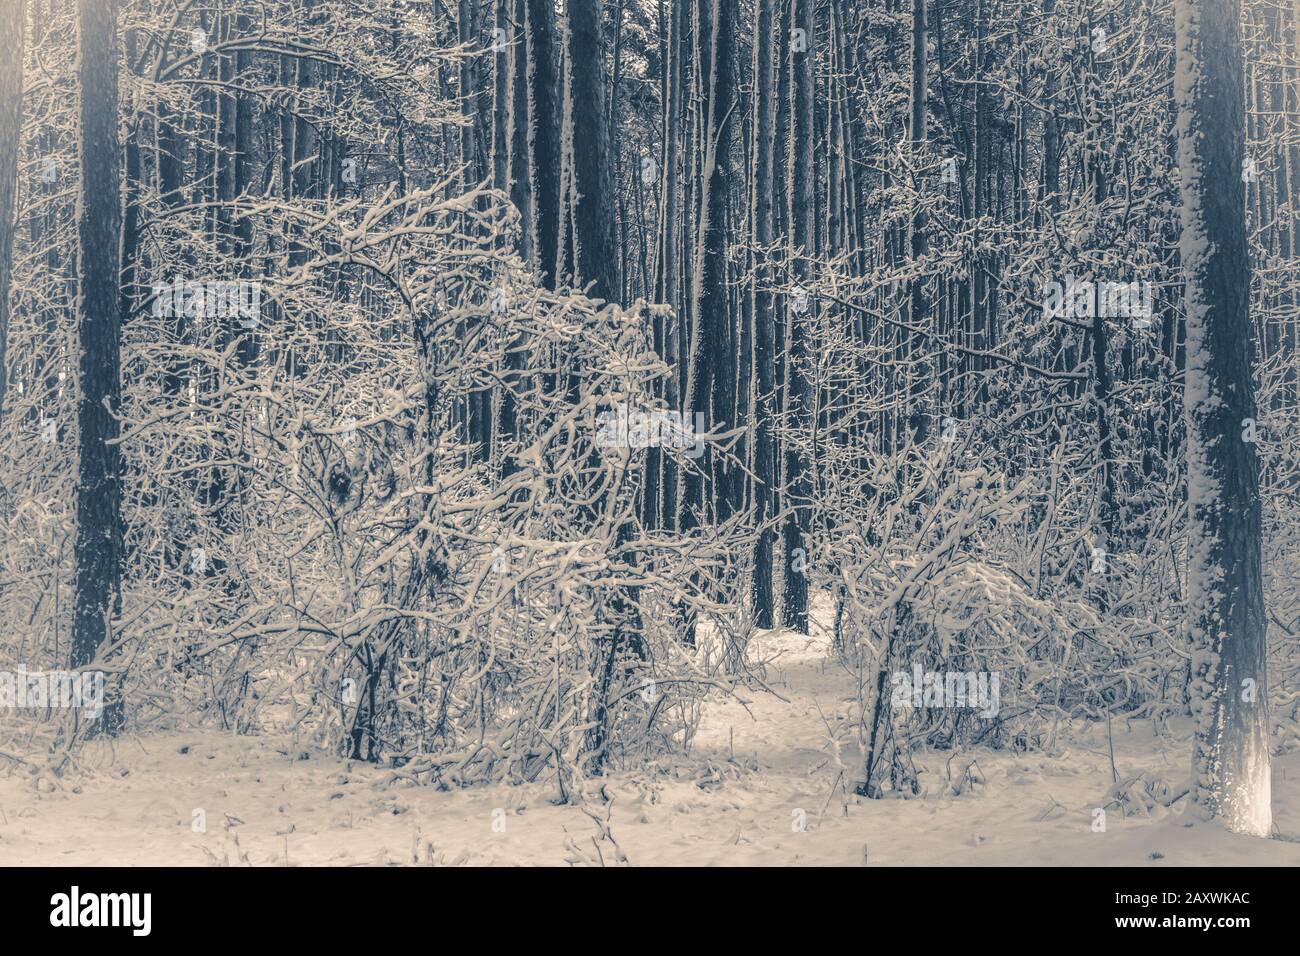 Old vintage photo. Tree pine spruce in magic forest winter with falling snow. Snow forest. Christmas Winter New Year background trembling scenery. Stock Photo